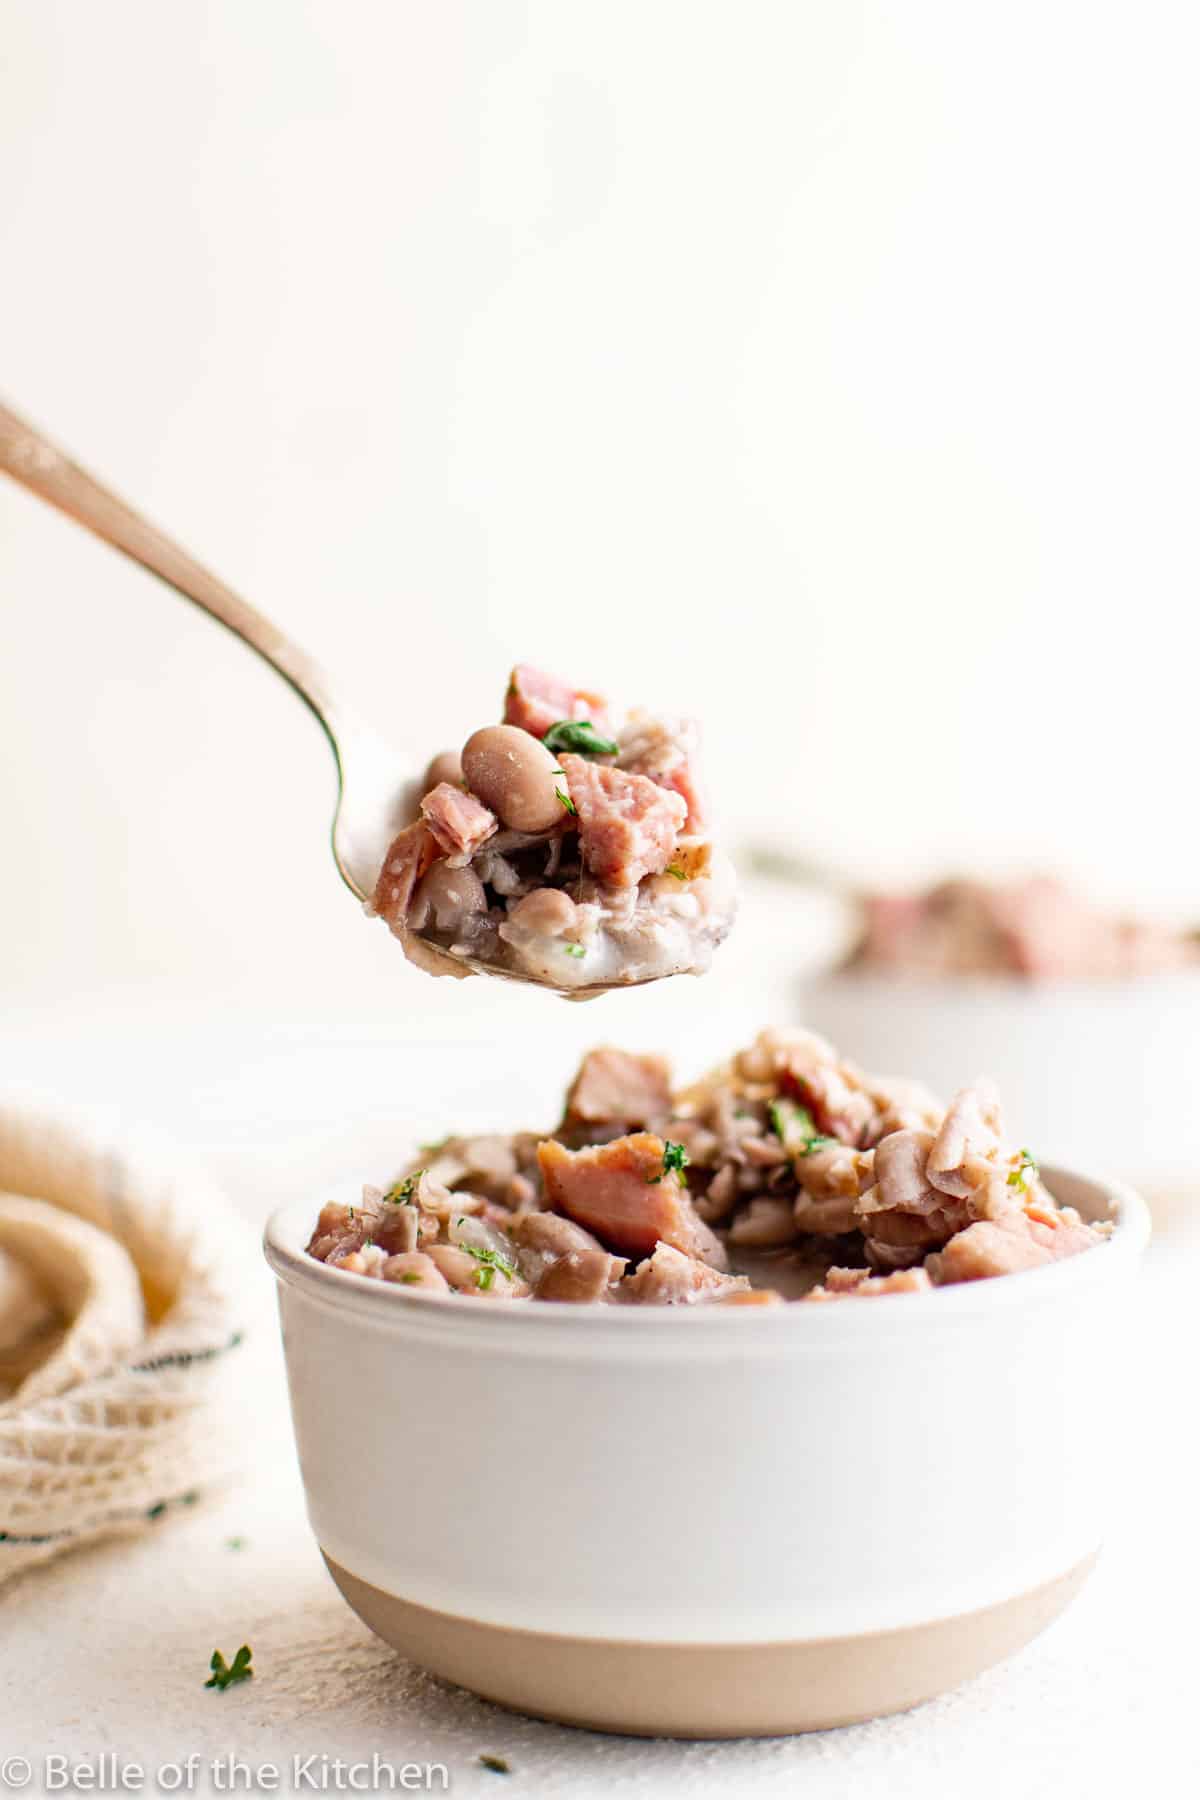 a spoon scooping up ham and beans.